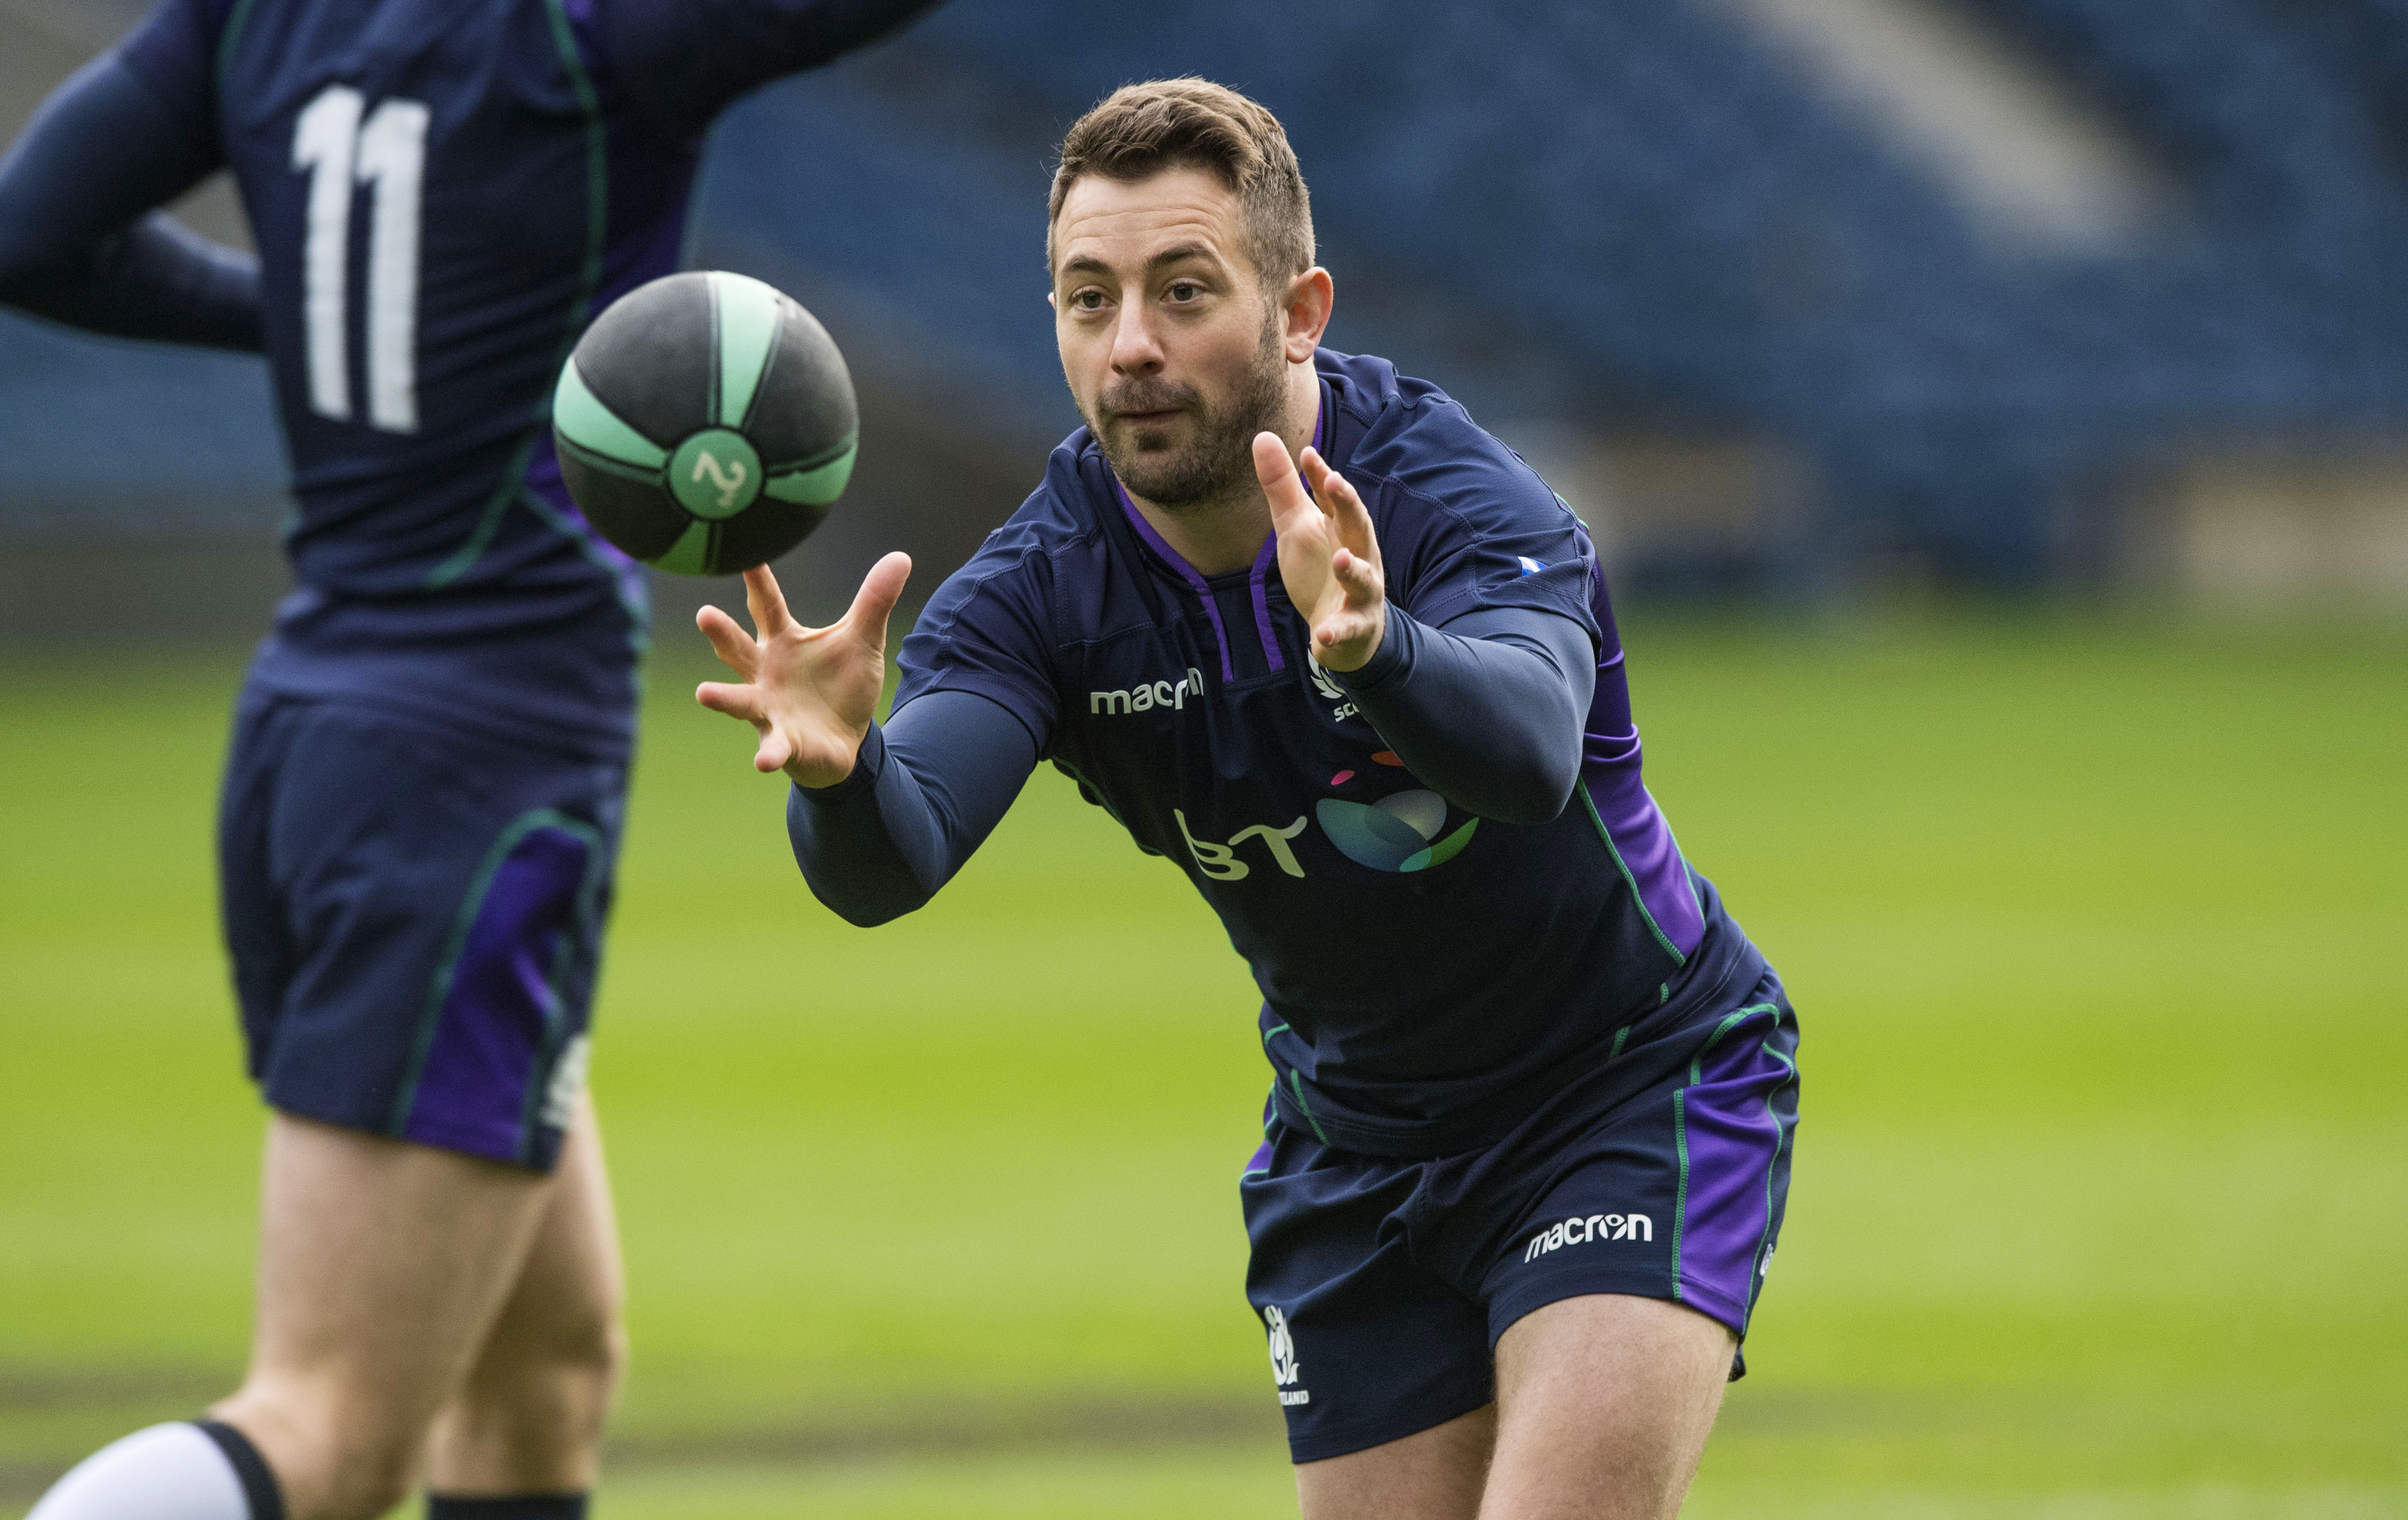 Greig Laidlaw will be the "Dad" again for Scotland with a new midfield combination against Argentina again.